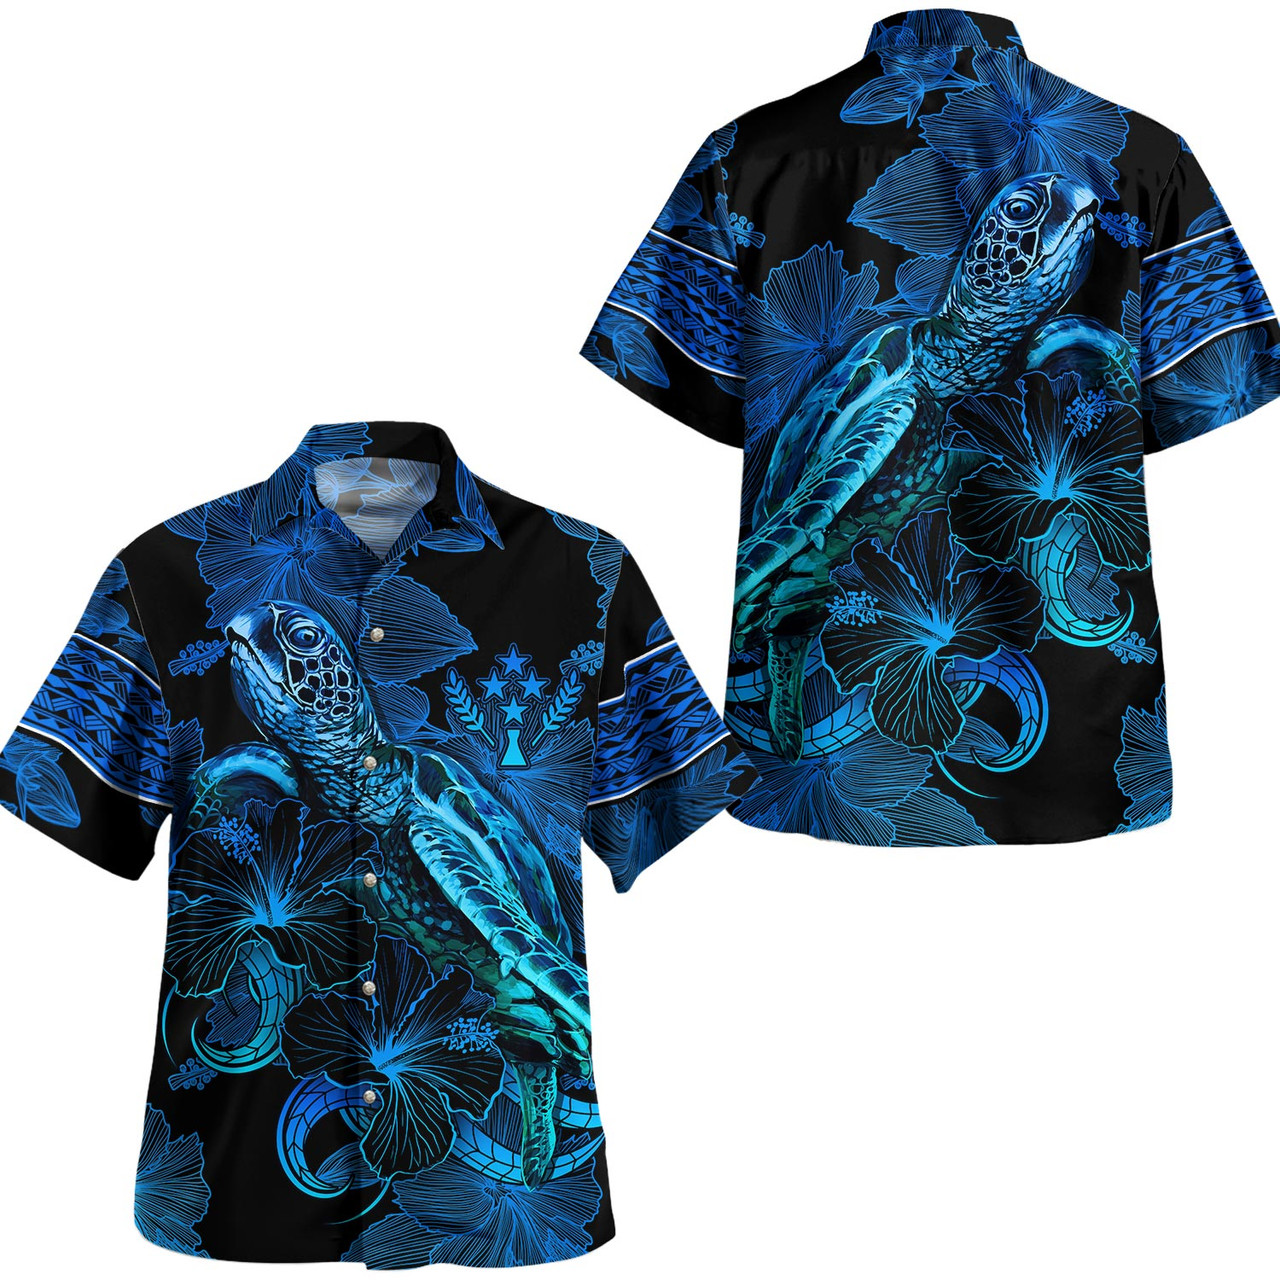 Kosrae Combo Puletasi And Shirt Sea Turtle With Blooming Hibiscus Flowers Tribal Blue